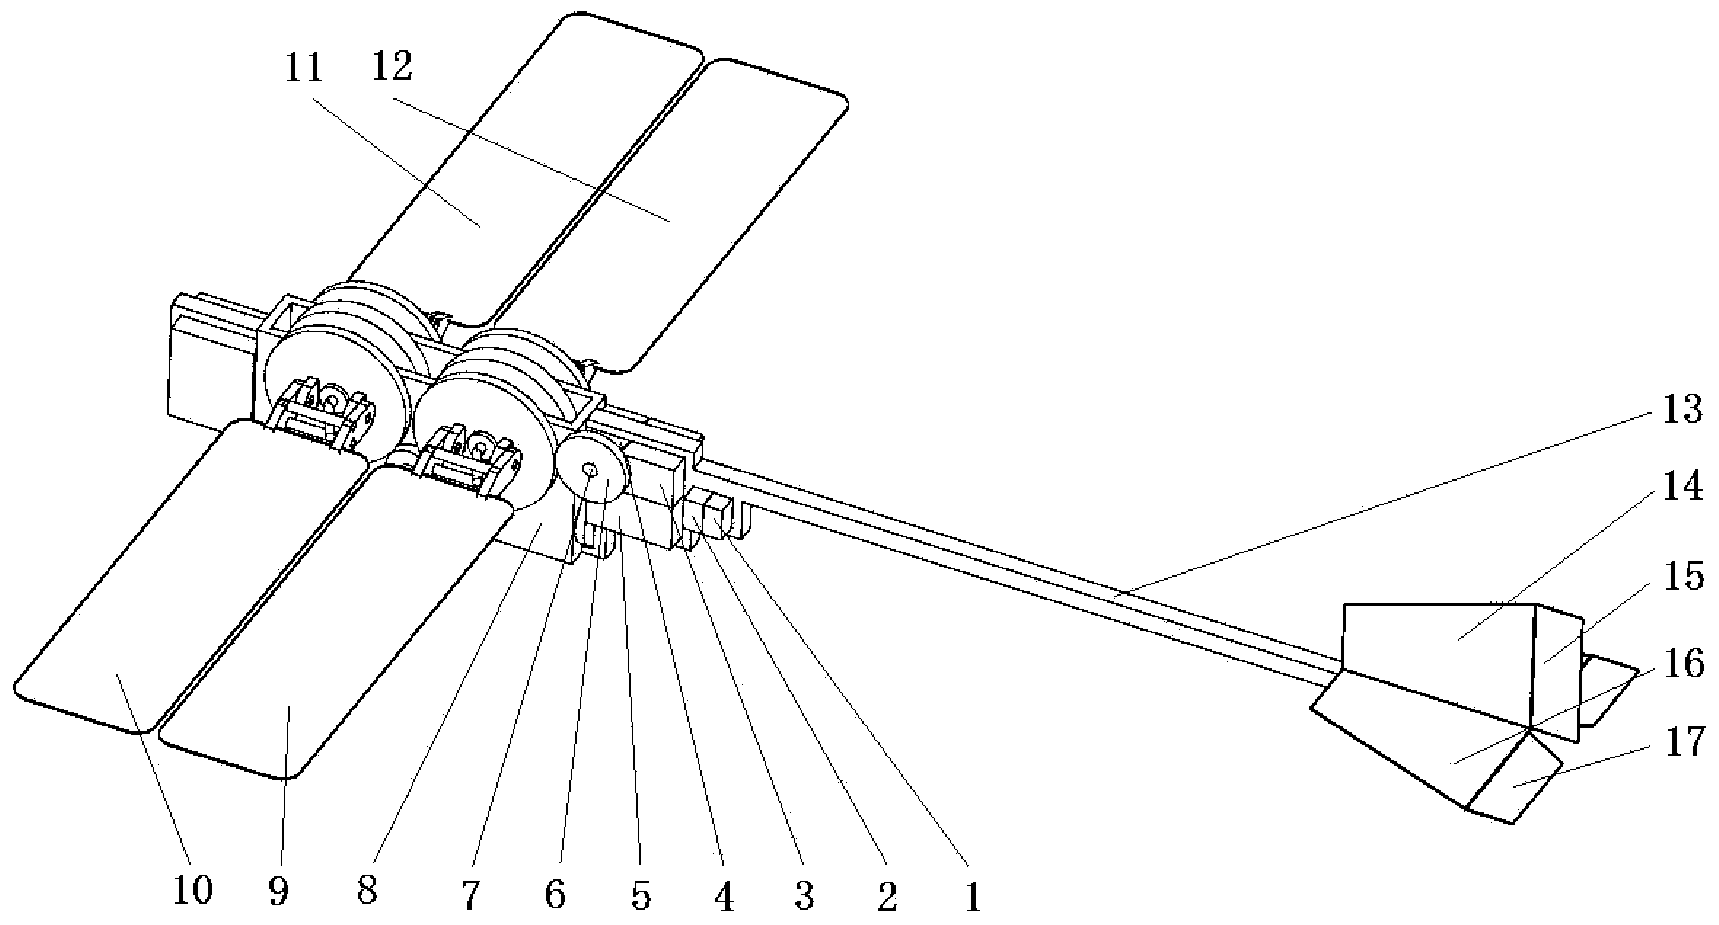 Miniature insect-like double-rotation flapping wing air vehicle